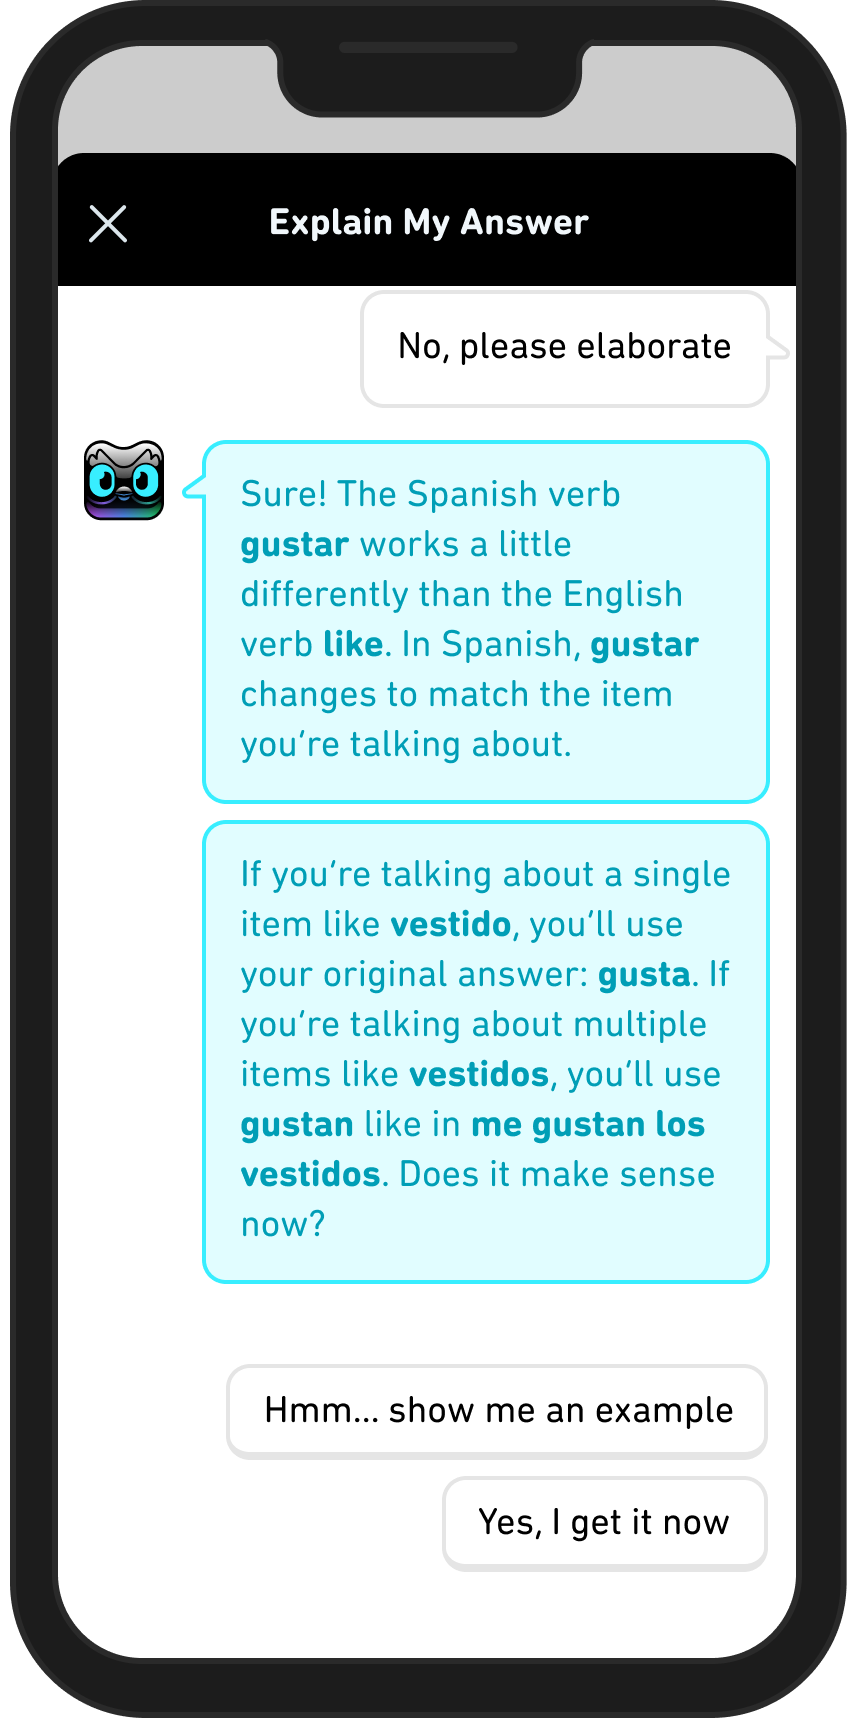 Duolingo Max's Explain My Answer feature generates multiple on demand answers to user questions.